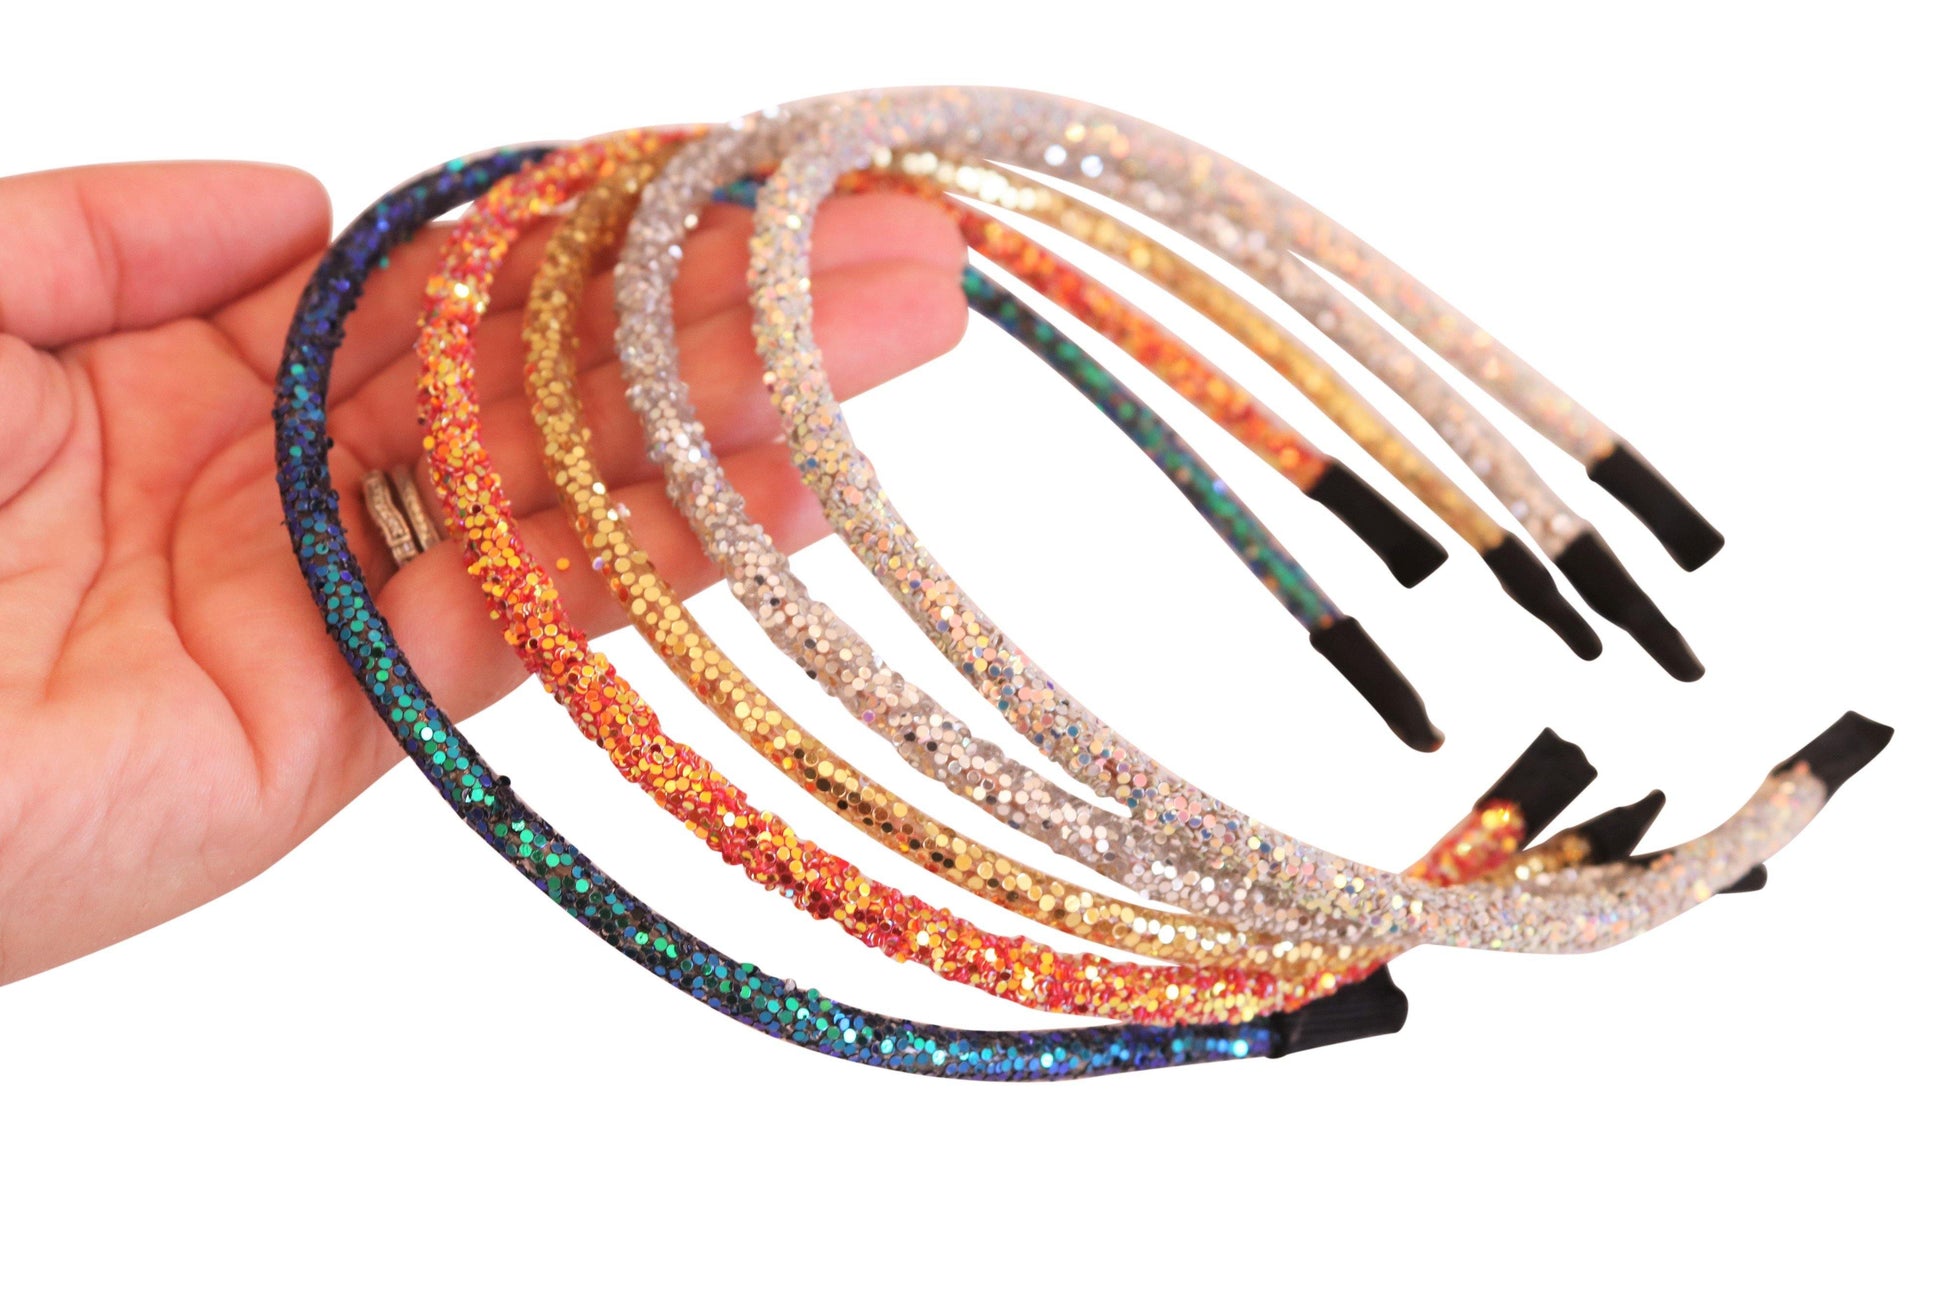 Chunky Iridescent Glitter Lined Headbands - Pretty in Pink Supply